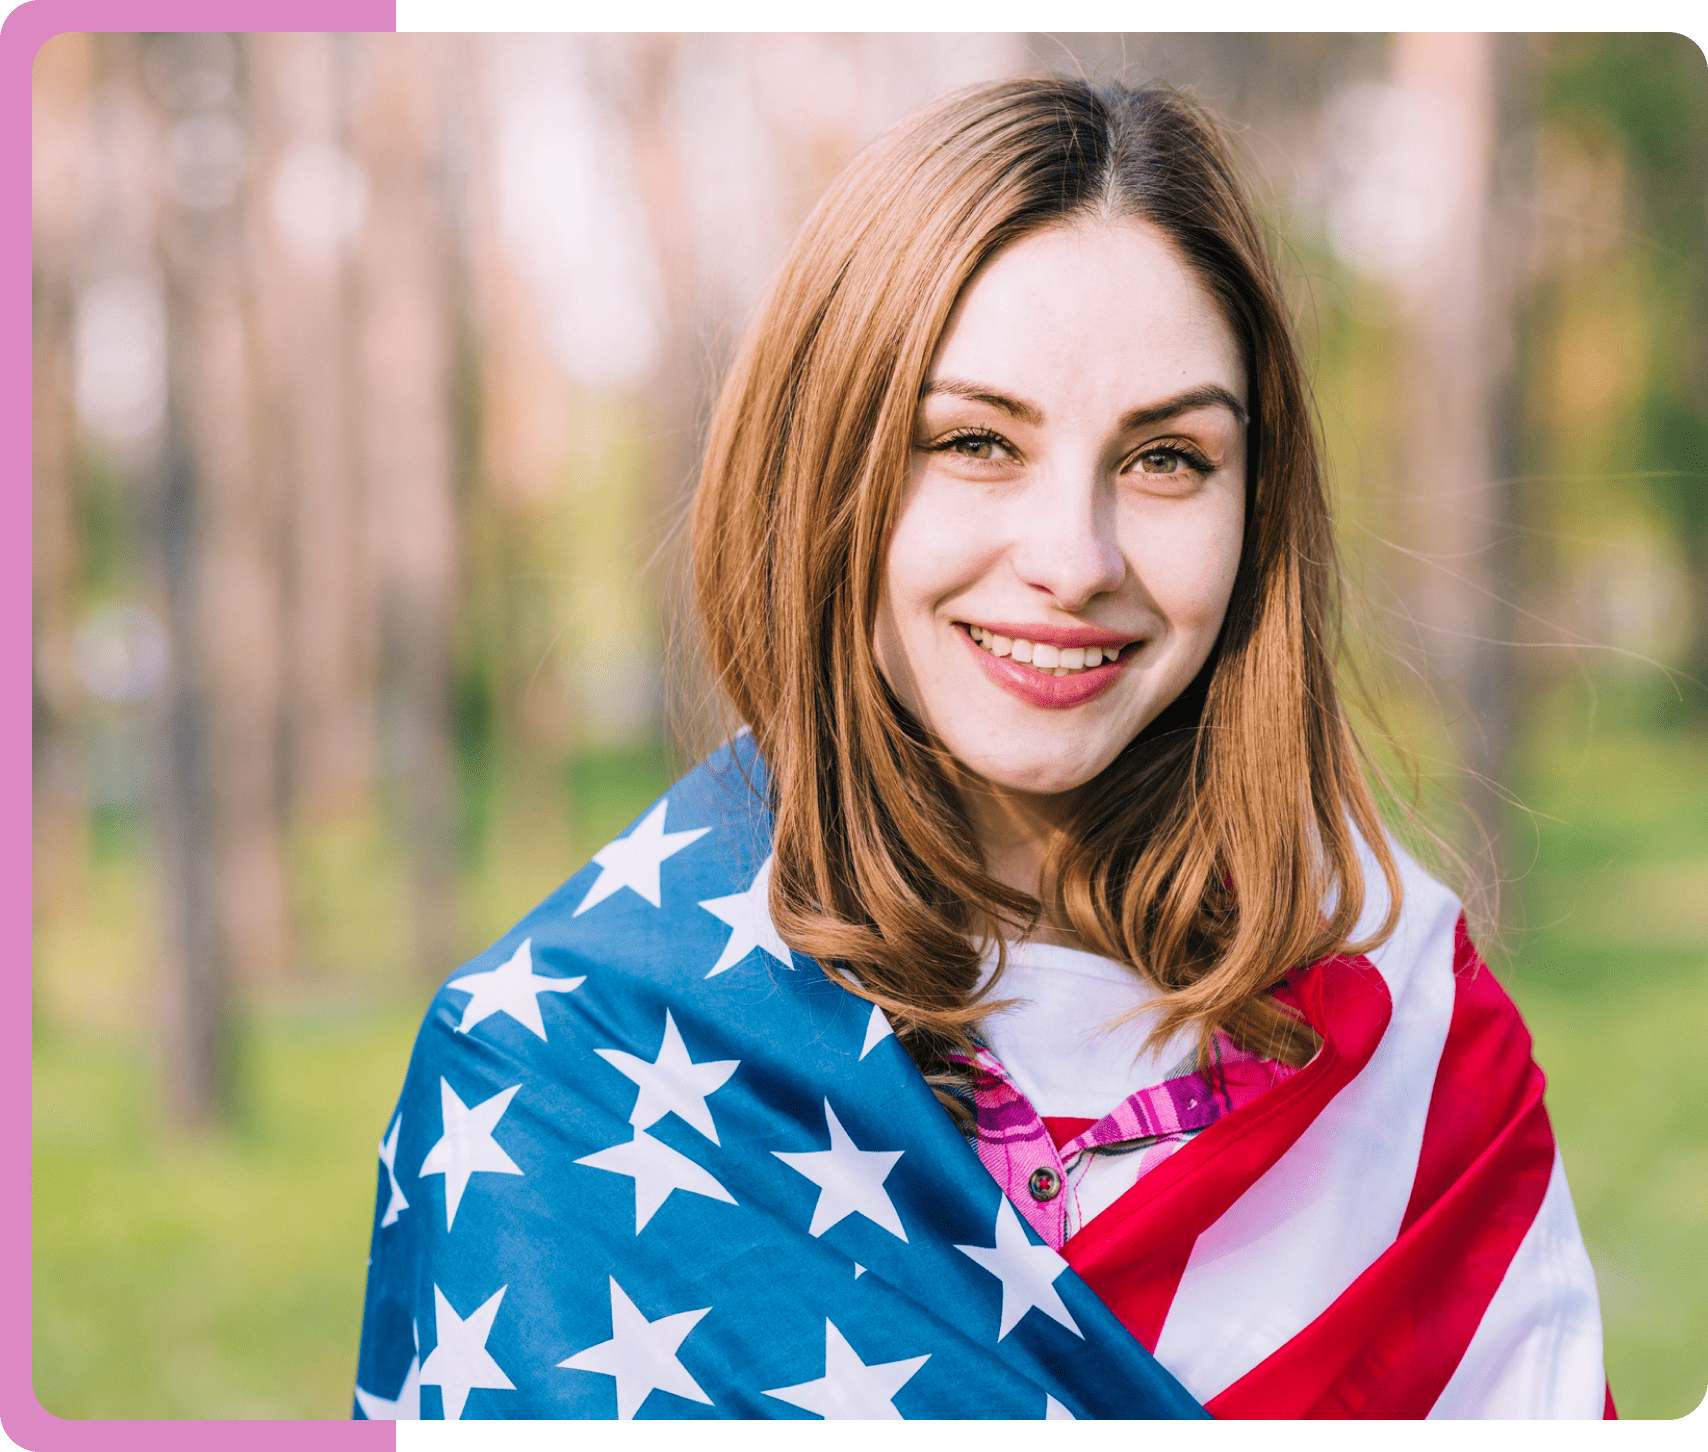 A blonde American lady with an American flag wrapped around her shoulders.